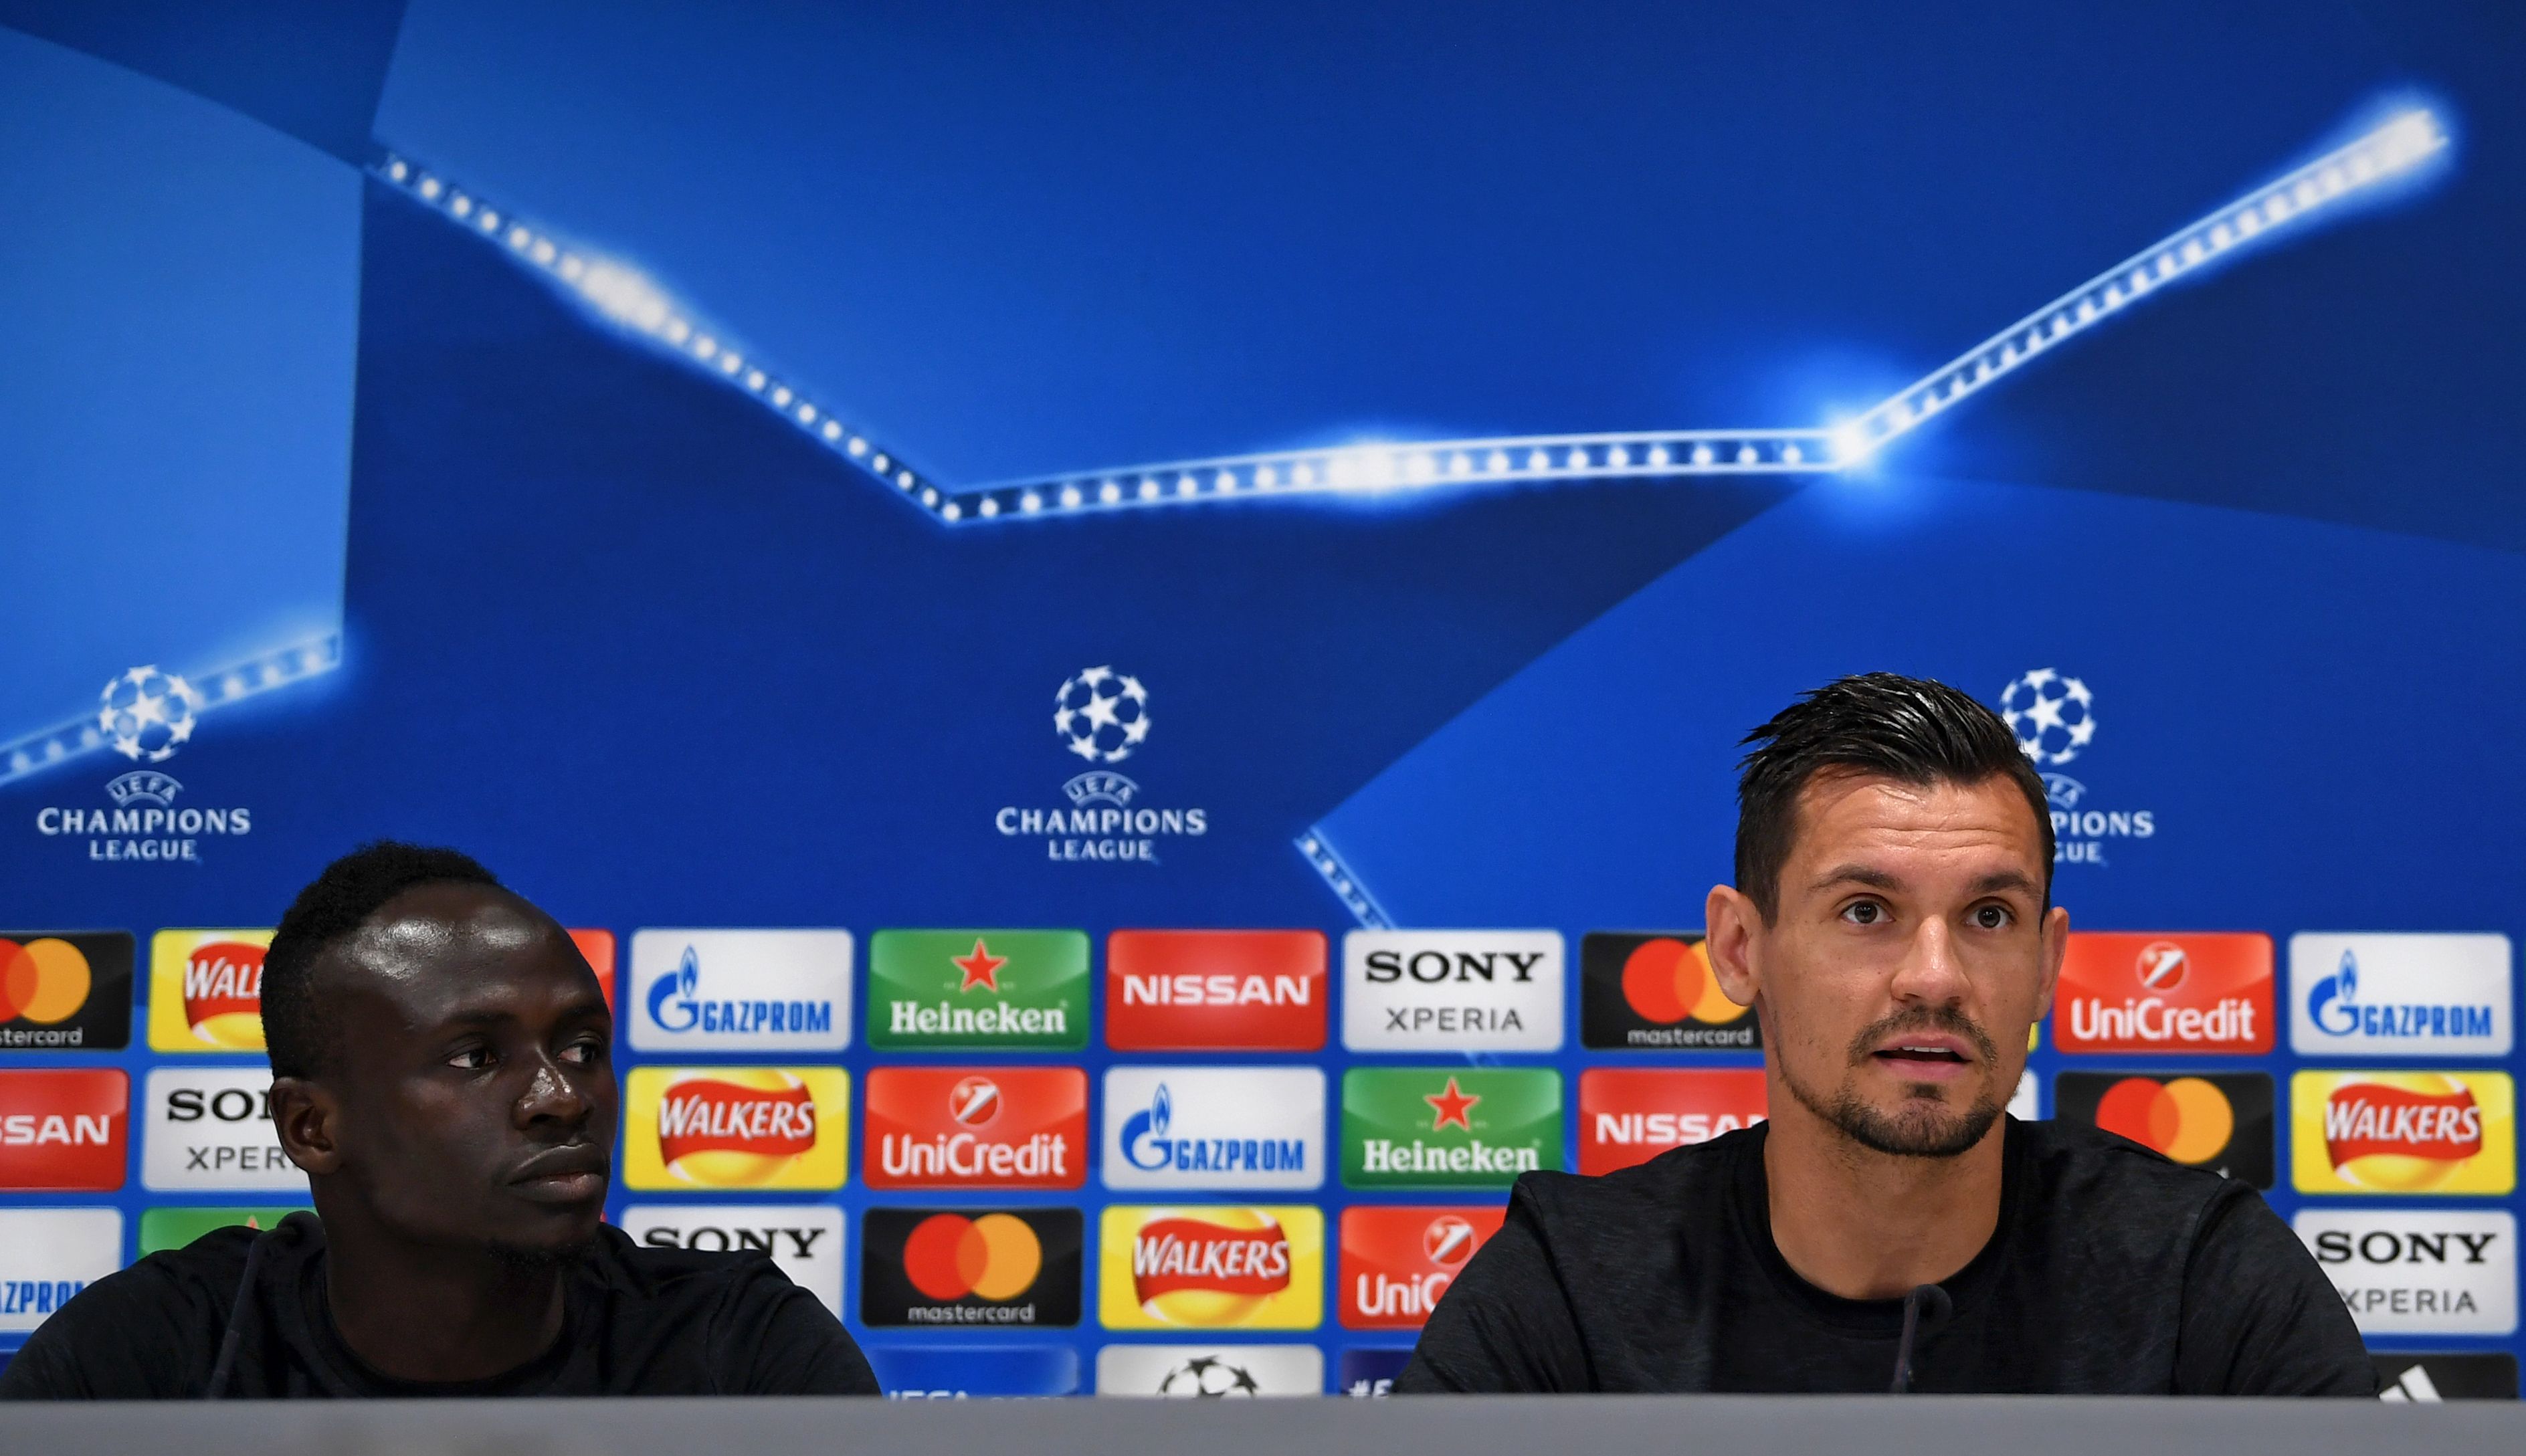 Liverpool's Senegalese midfielder Sadio Mane (L) and Liverpool's Croatian defender Dejan Lovren attends a press conference during a media day at Anfield stadium in Liverpool, north west England on May 21, 2018, ahead of their UEFA Champions League final football match against Real Madrid in Kiev on May 26. (Photo by Paul ELLIS / AFP)        (Photo credit should read PAUL ELLIS/AFP/Getty Images)